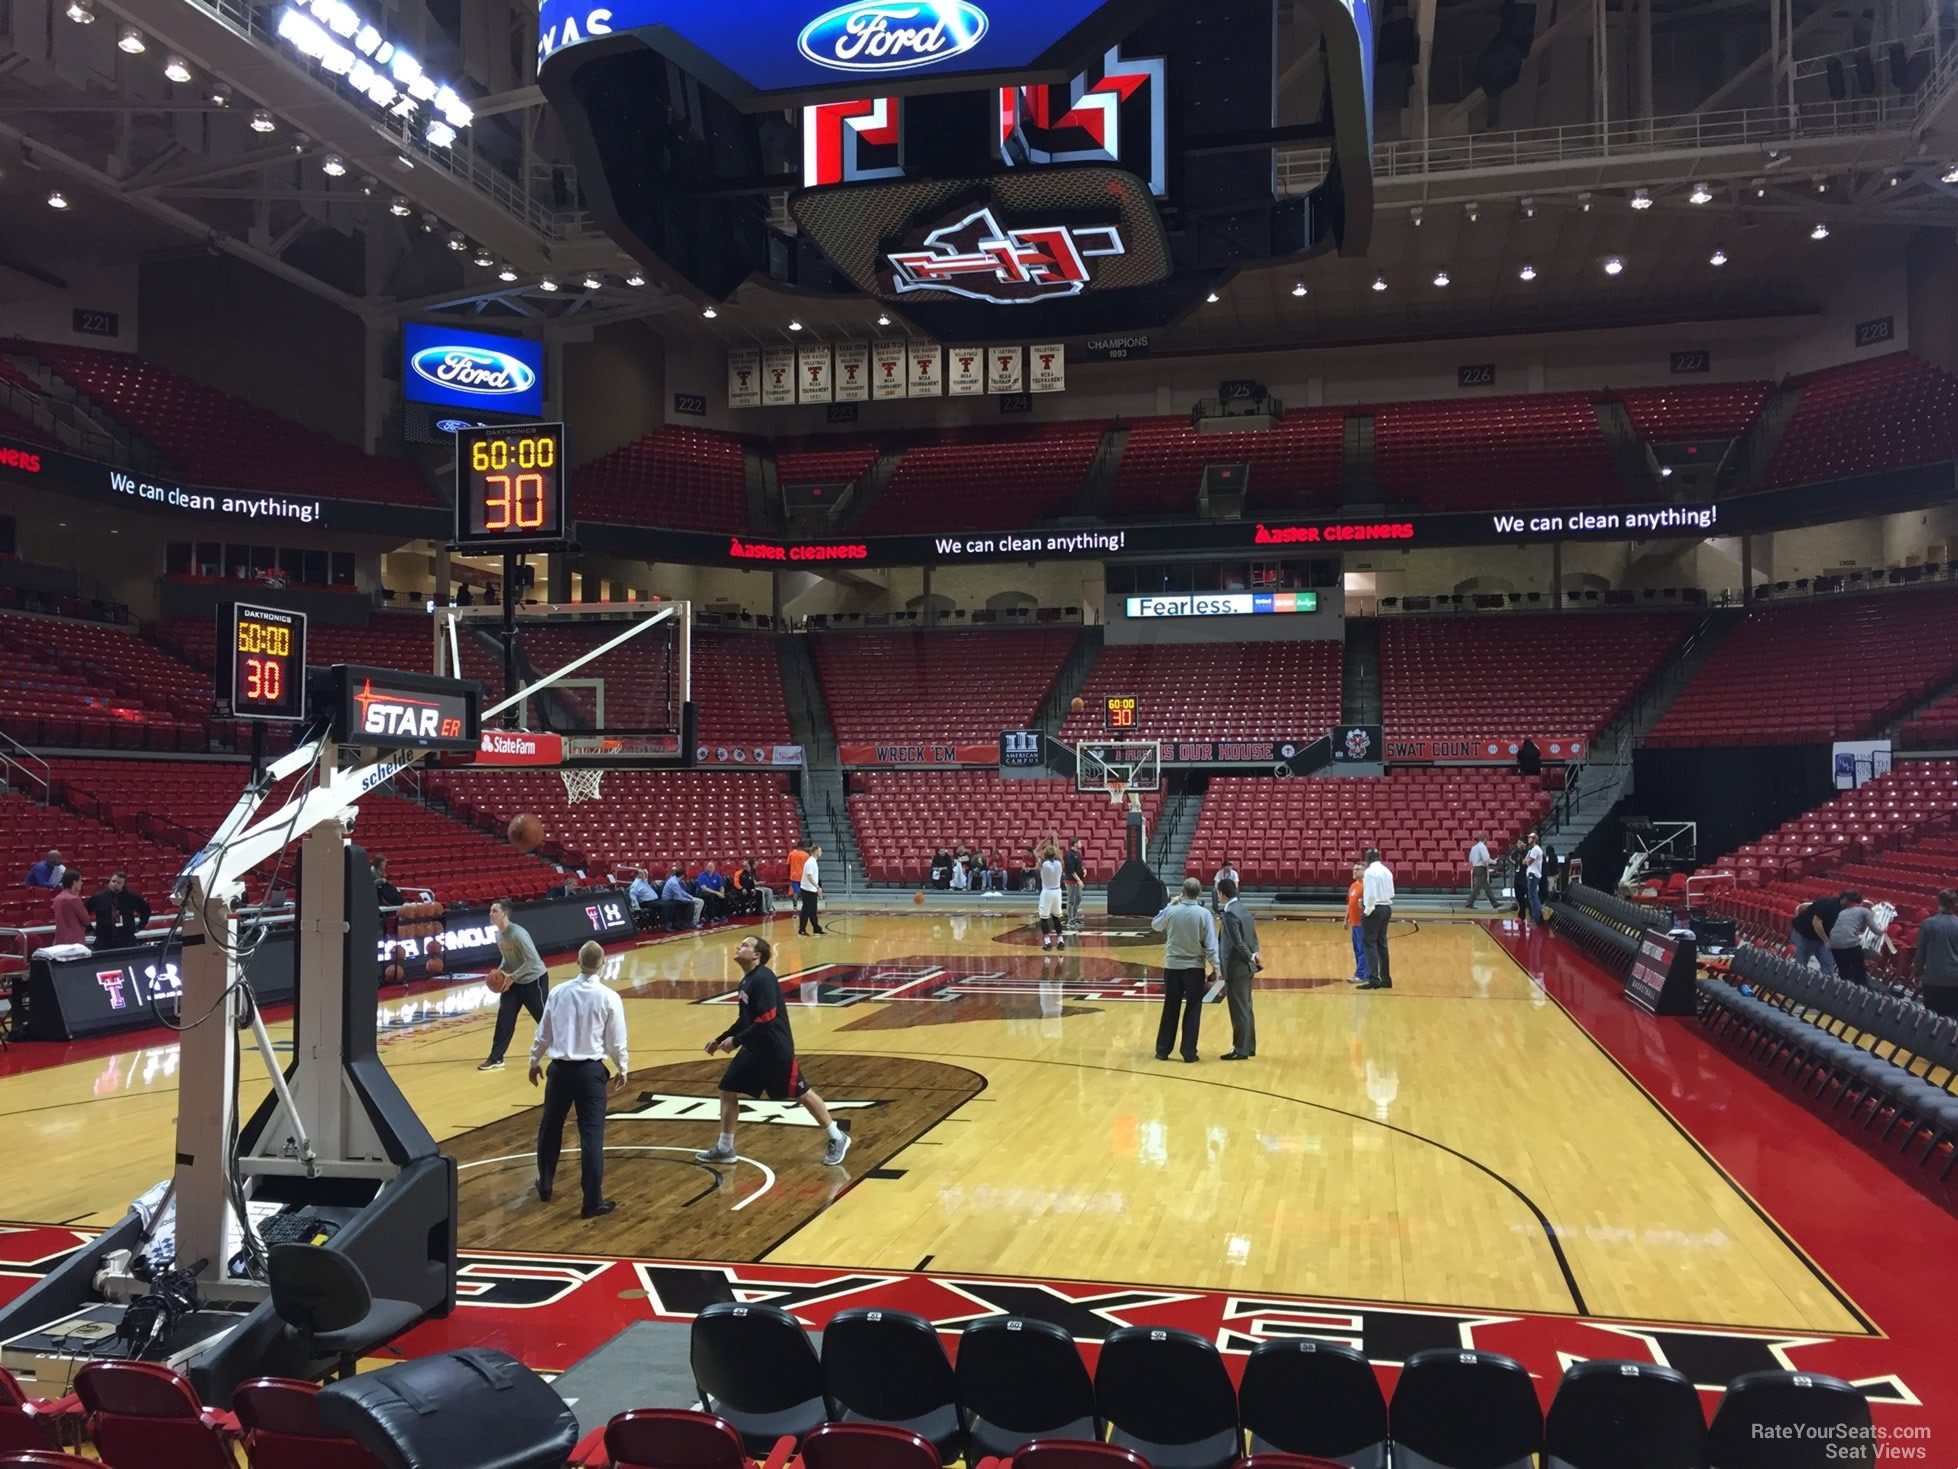 section 106, row 7 seat view  - united supermarkets arena